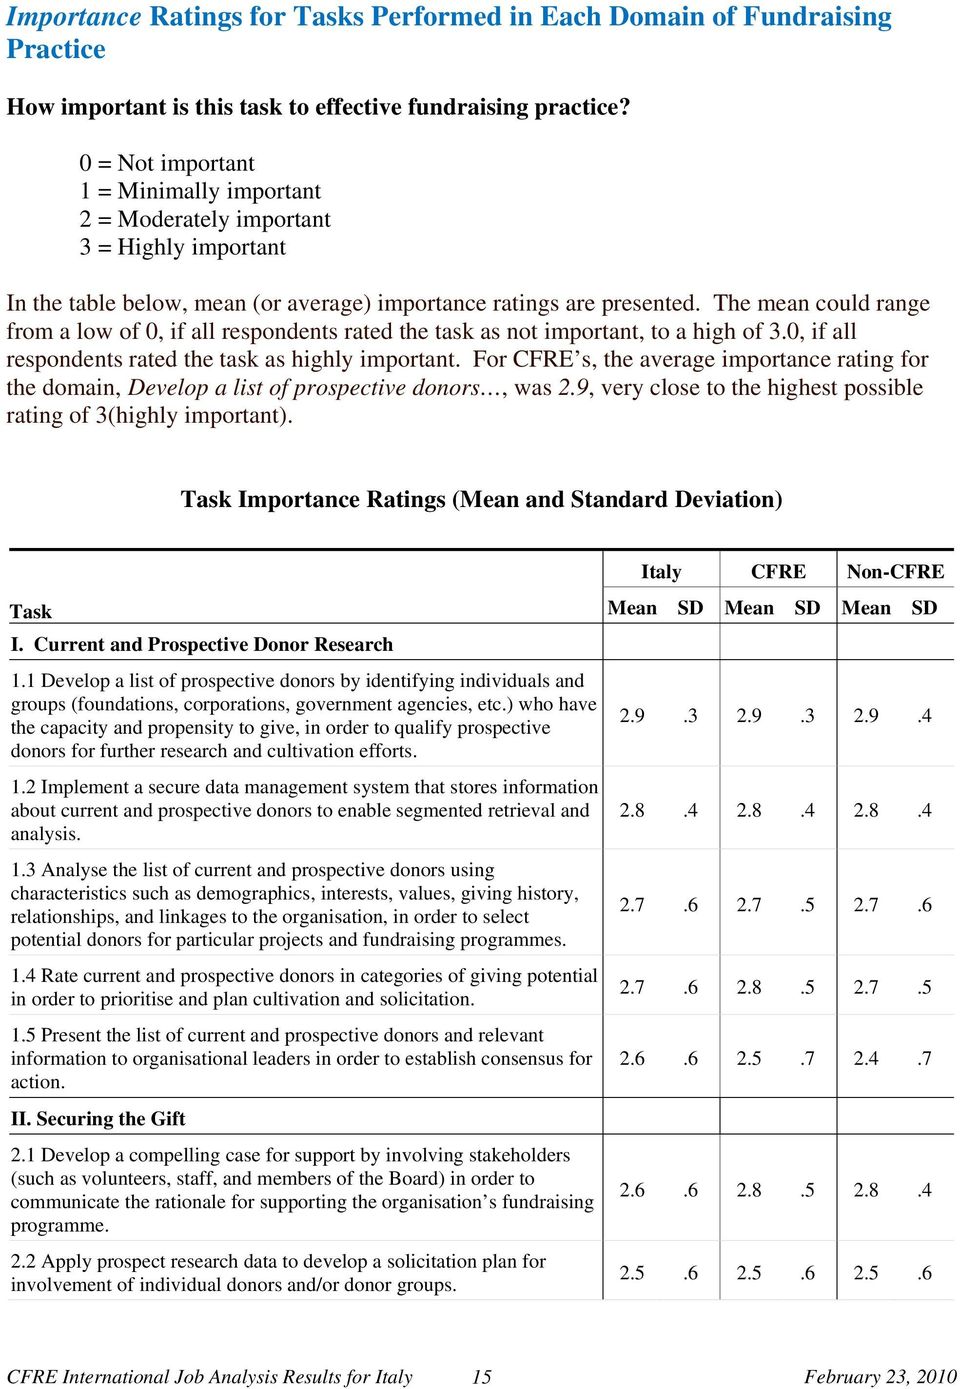 The mean could range from a low of 0, if all respondents rated the task as not important, to a high of 3.0, if all respondents rated the task as highly important.